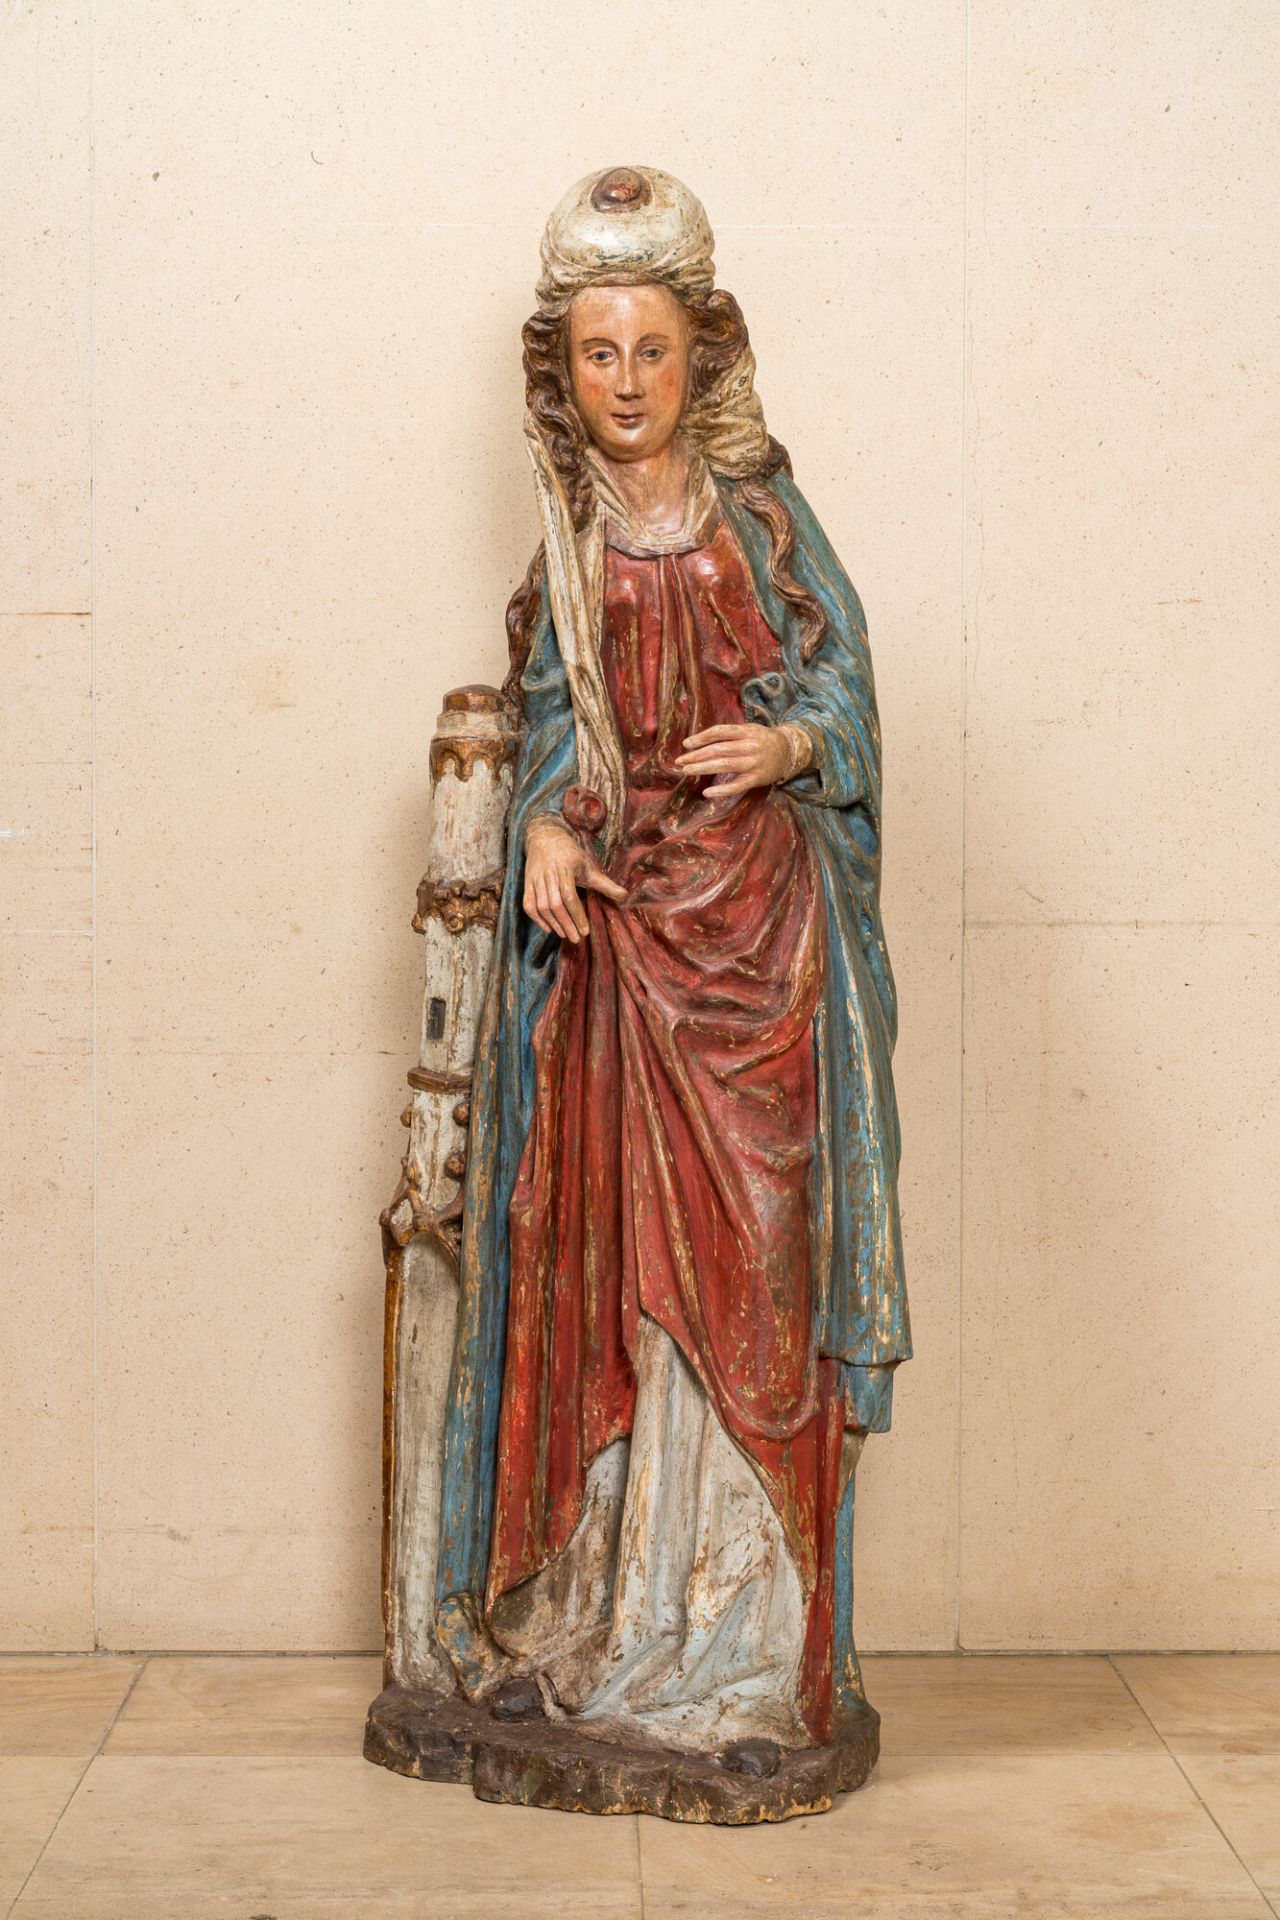 A large polychromed wooden figure of Saint Barbara, -Southern Netherlands, mid 16th C.